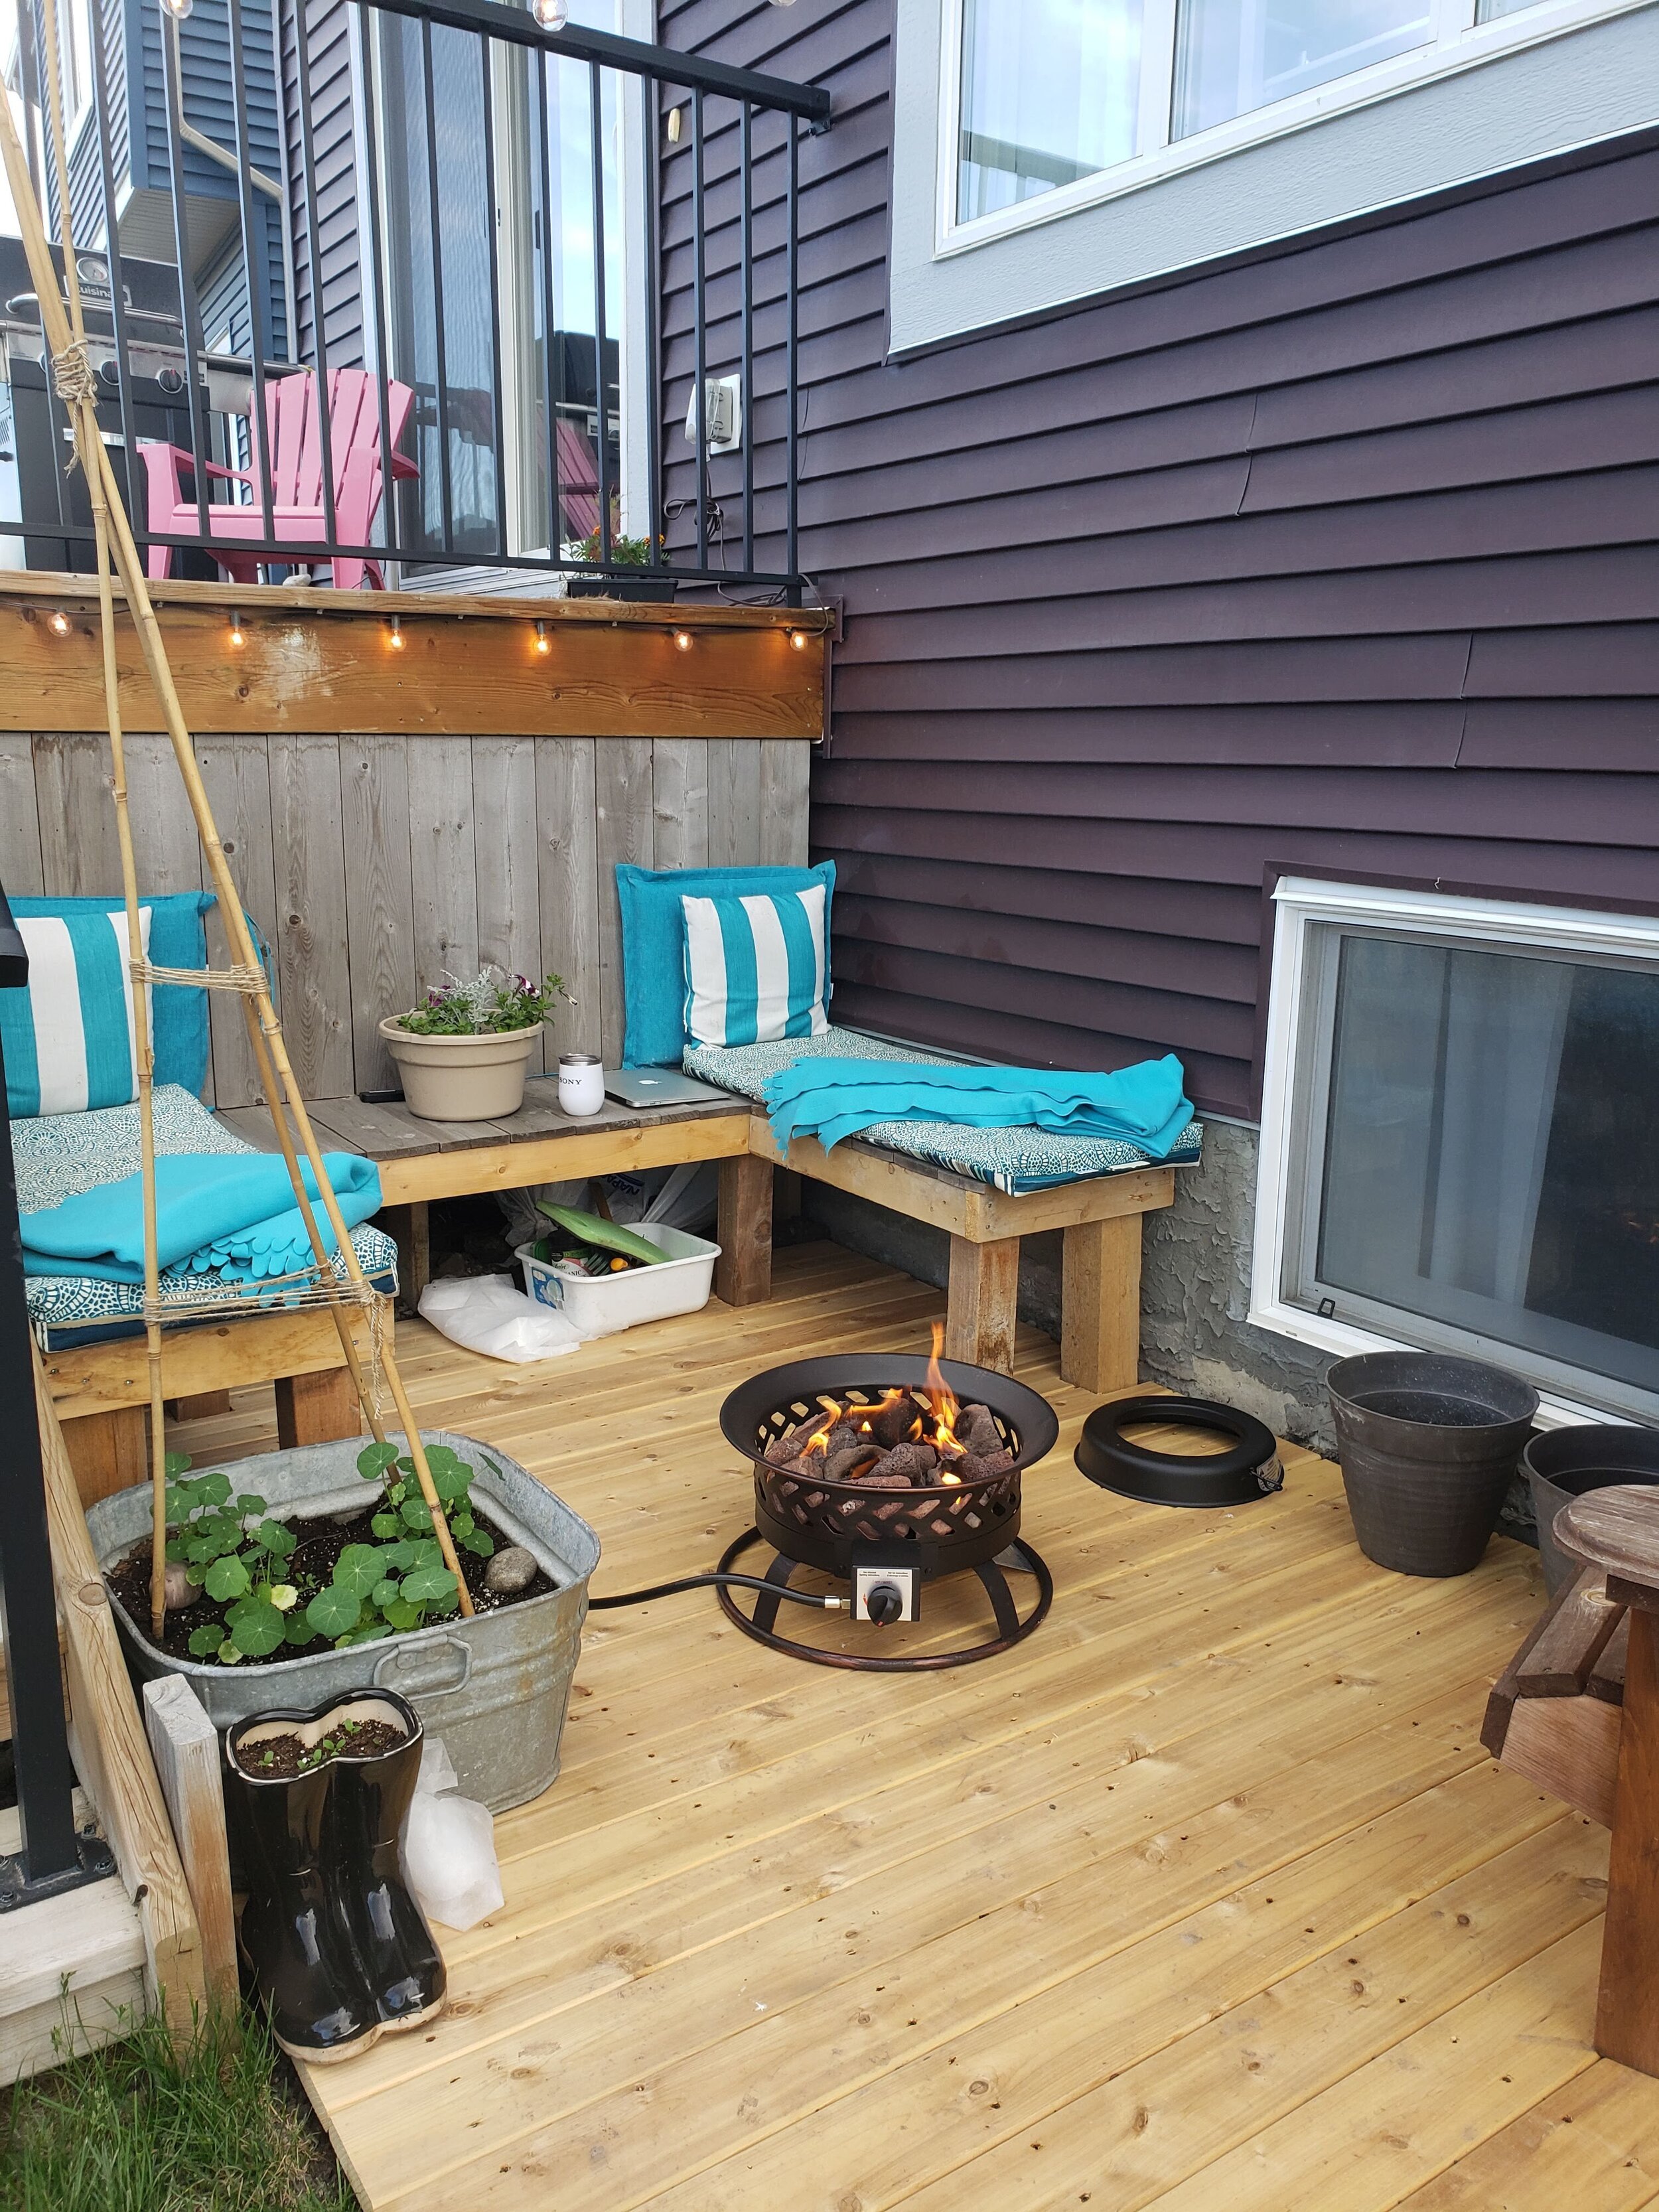 Now it's our outdoor living & gather space